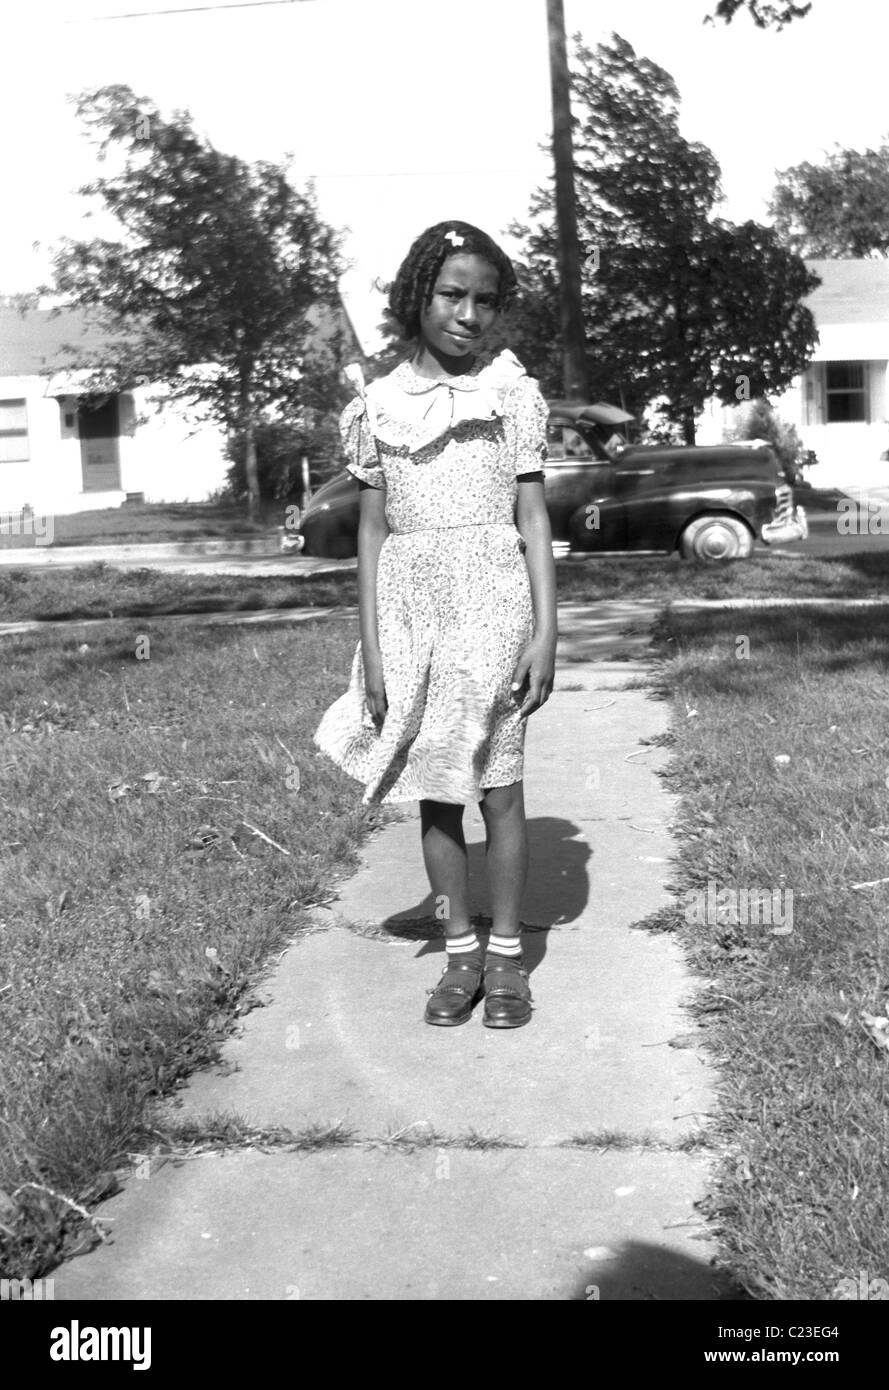 Very pretty young black girl with the family car in the background, poses outside her house in Washington suburbs, circa 1950's, U.S.A. Stock Photo